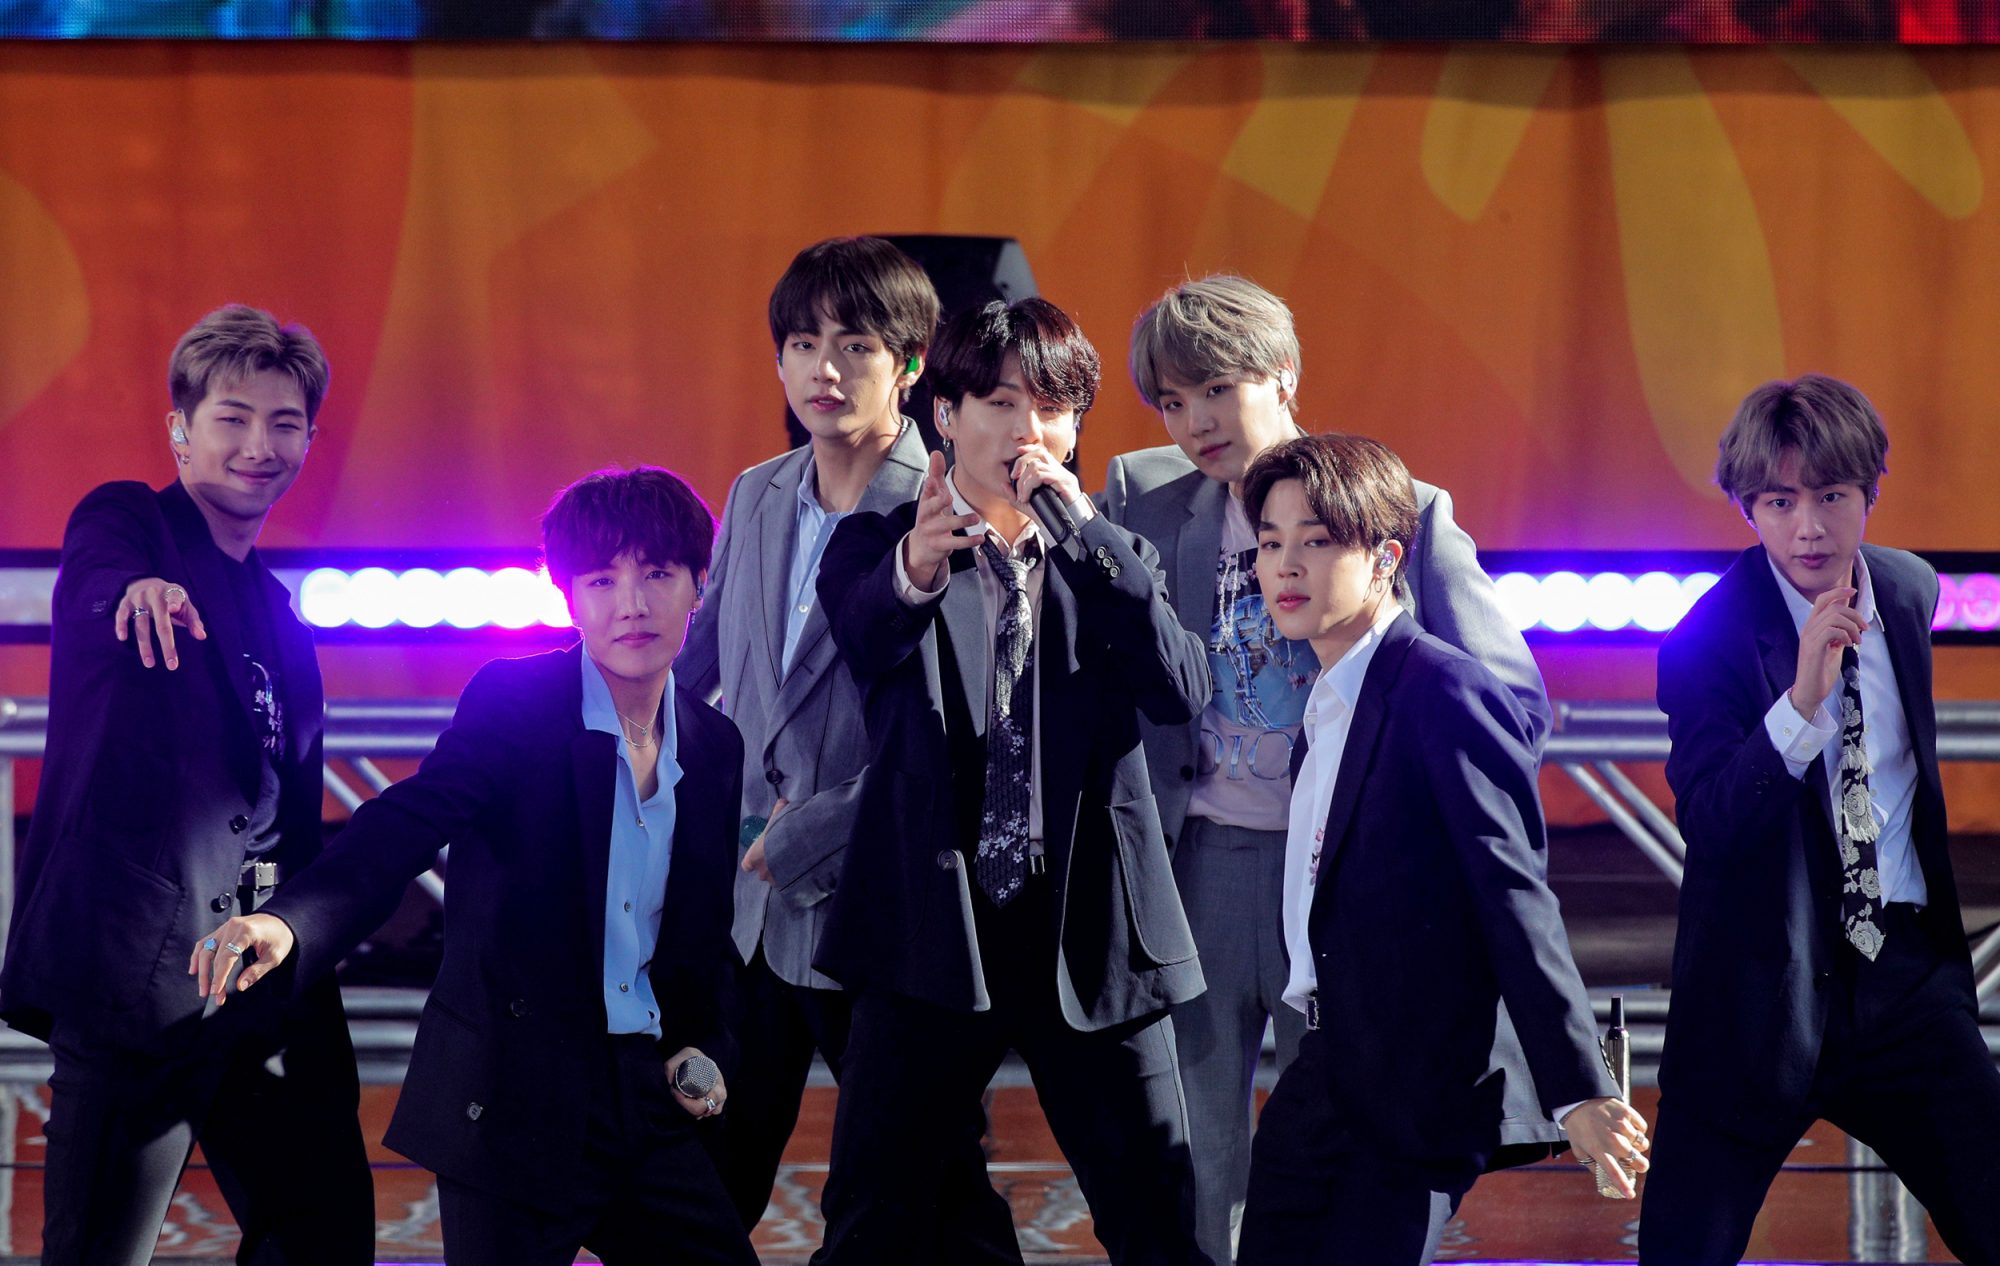 Time magazine names BTS its Entertainer of the Year